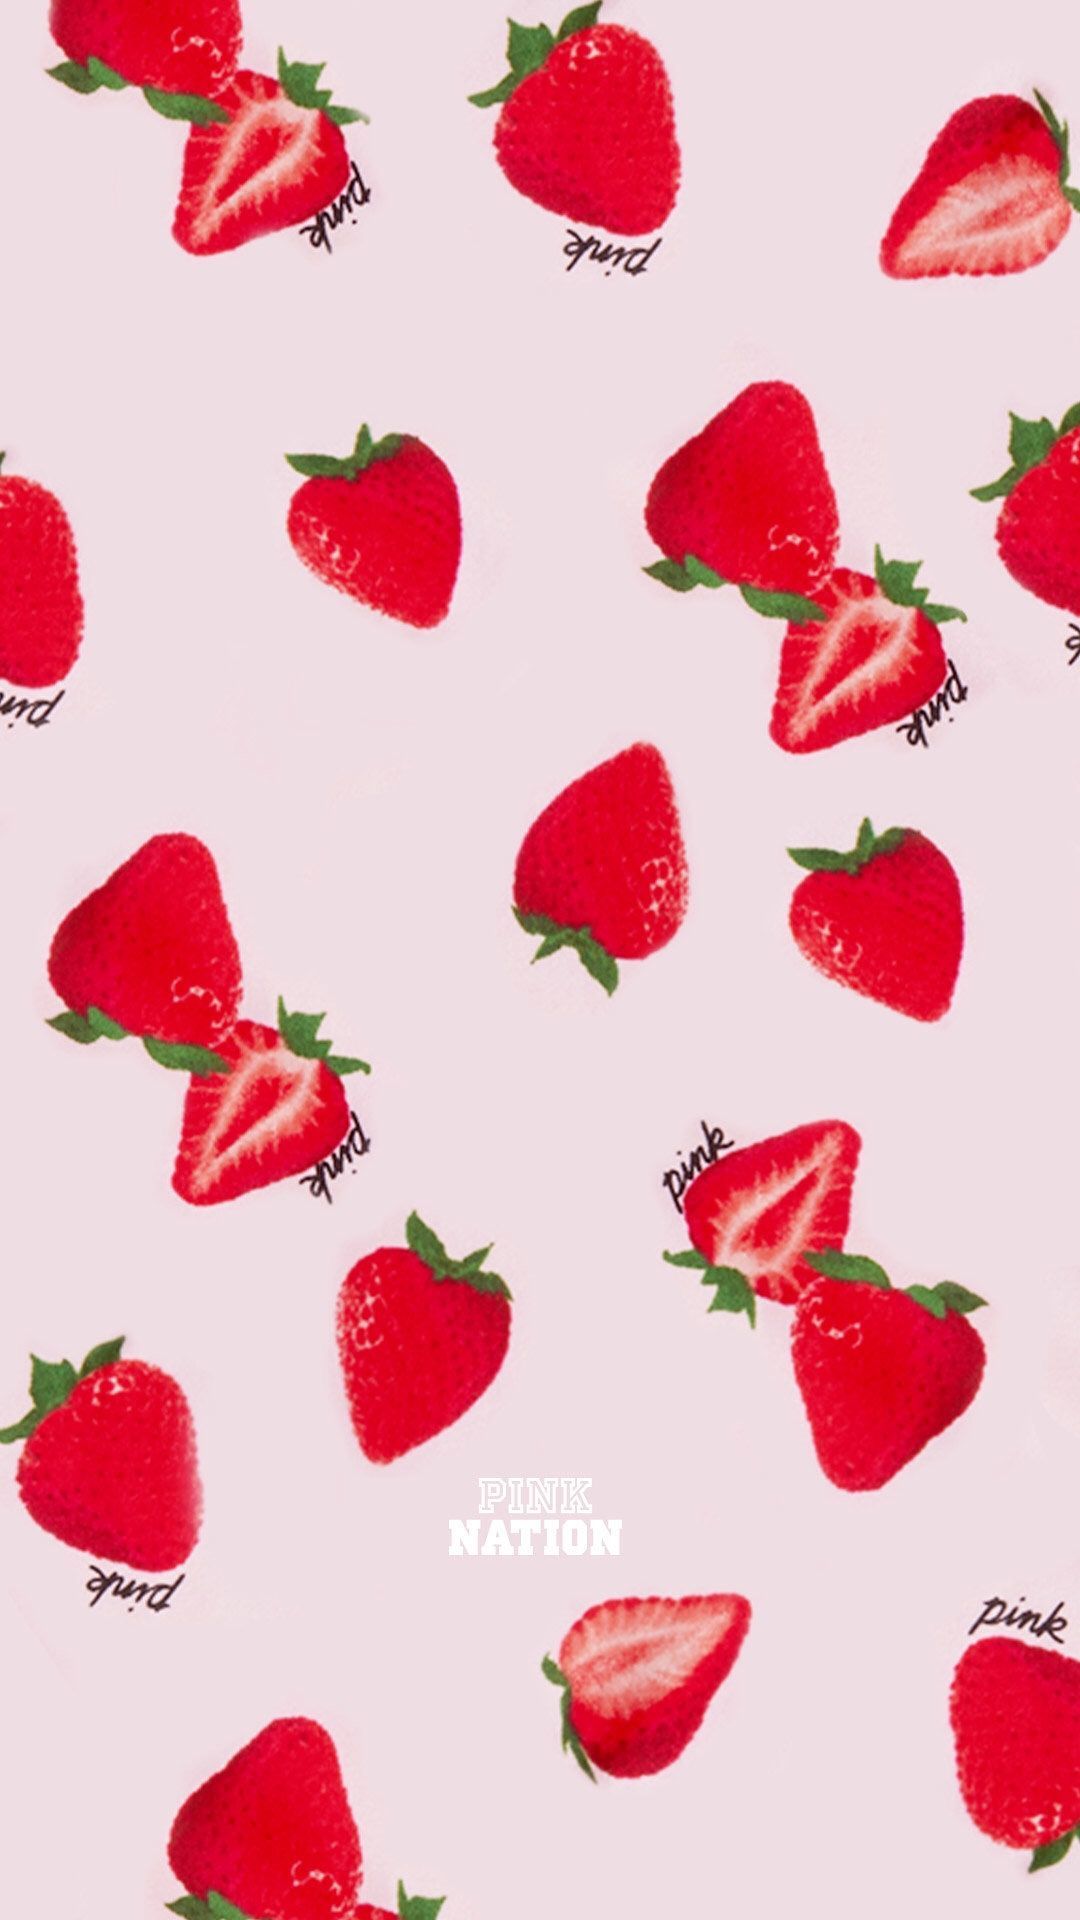 Strawberry Aesthetic Wallpapers On Wallpaperdog Strawberry milk by puffychi on deviantart. strawberry aesthetic wallpapers on